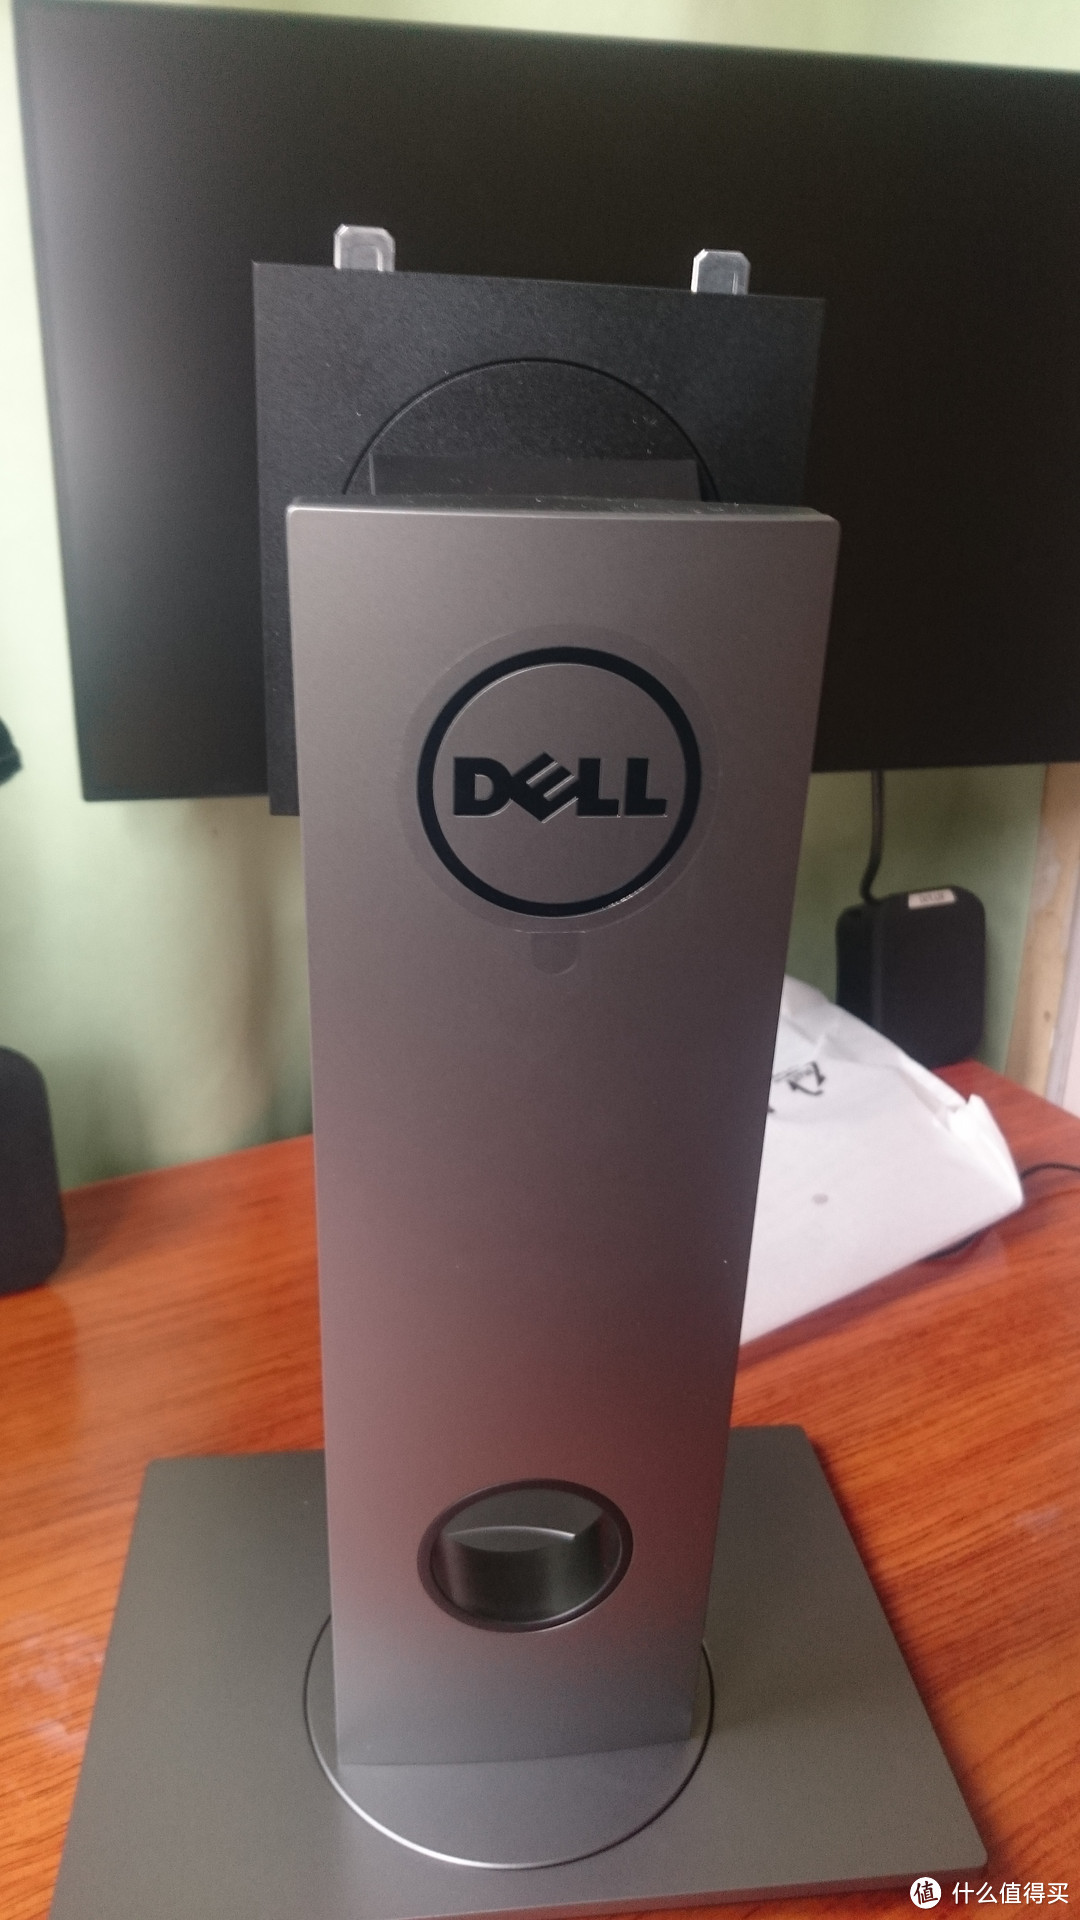 DELL 戴尔 P2417H 显示器 开箱